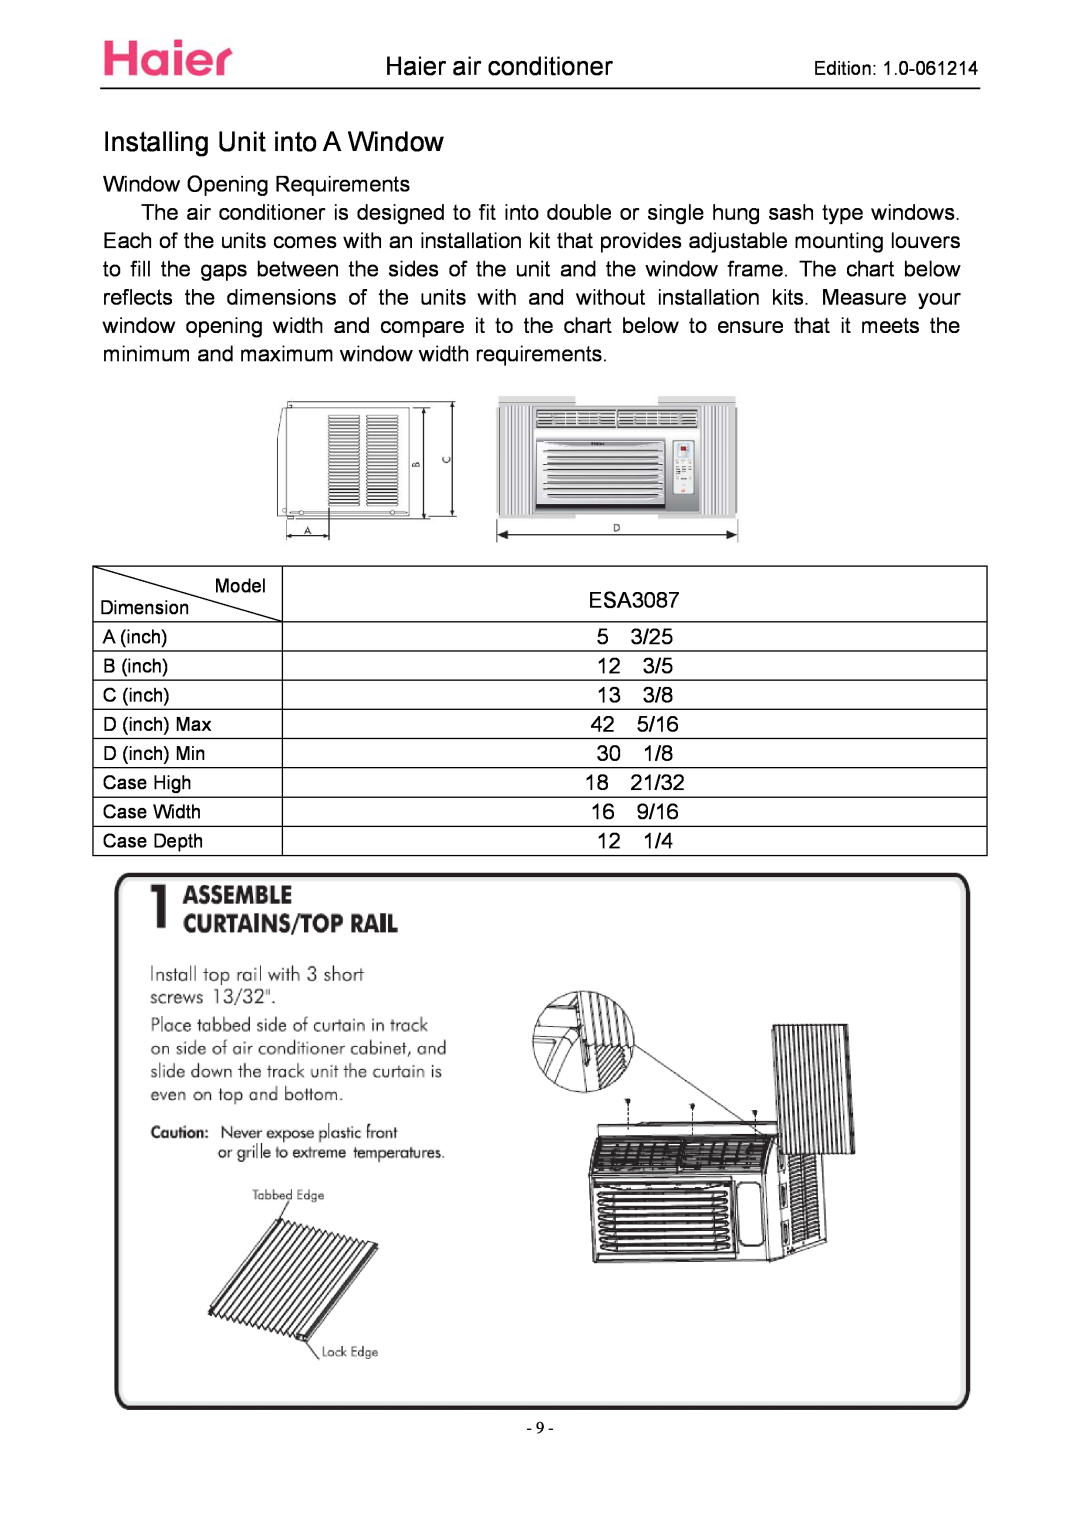 Haier ESA3087 service manual Installing Unit into A Window, Haier air conditioner 